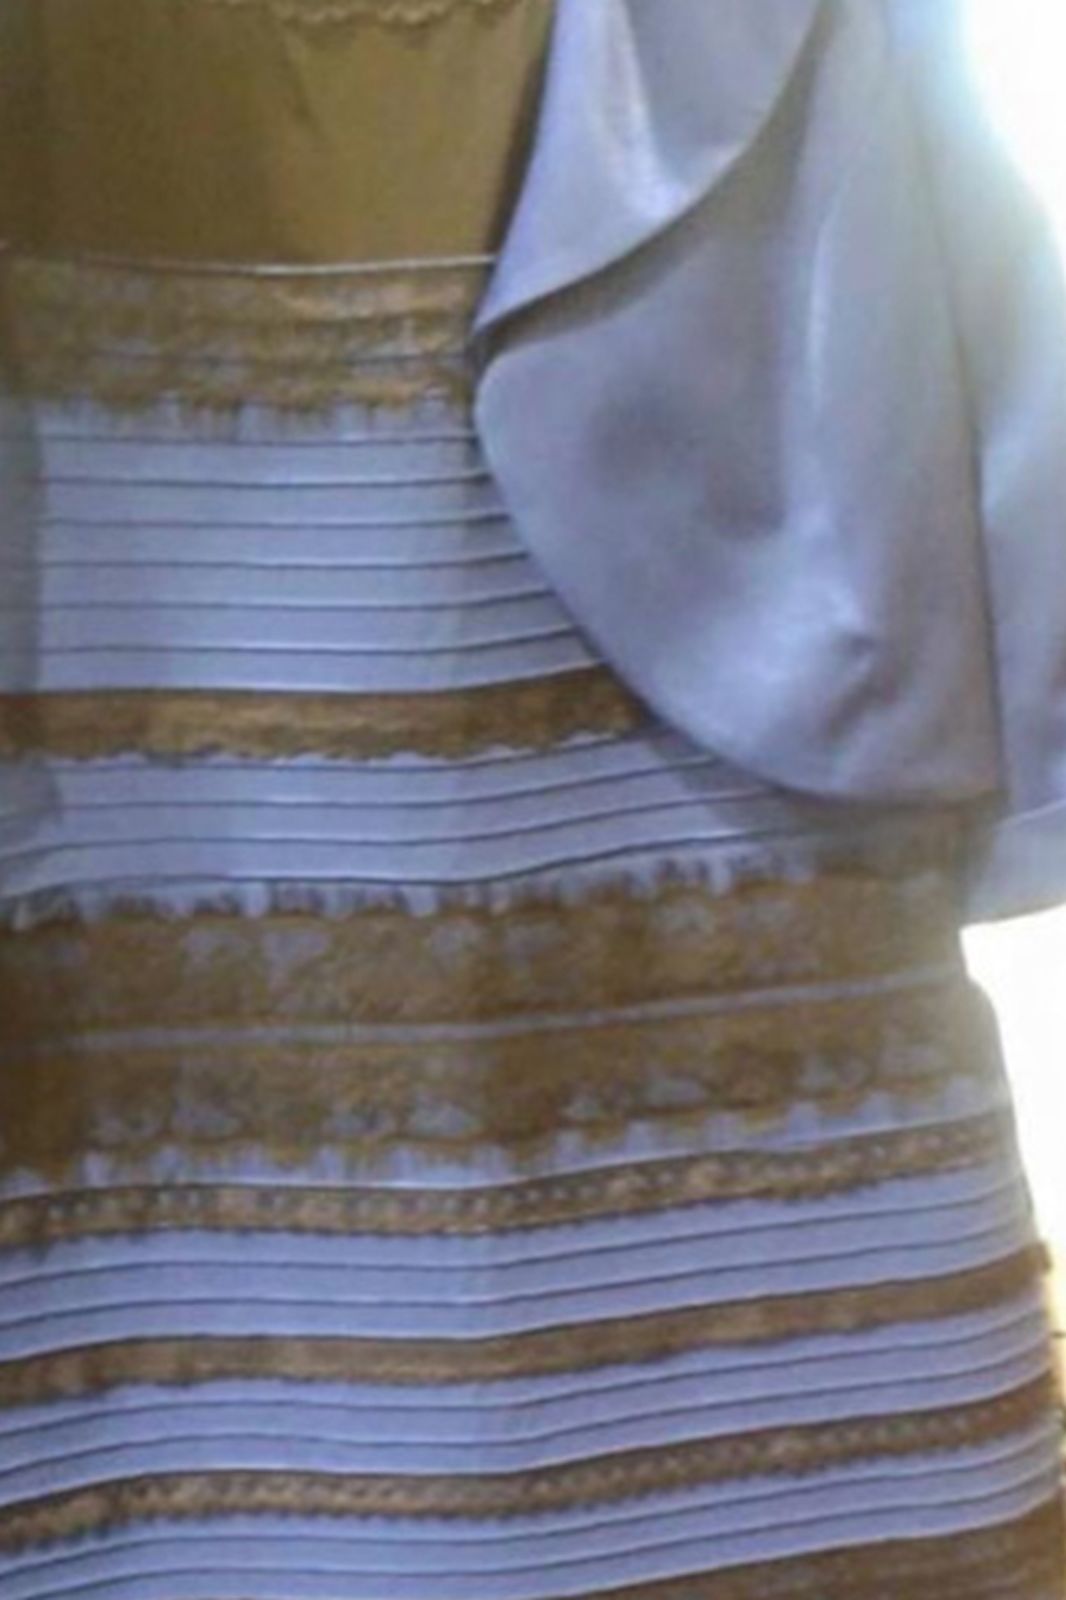 What color is this dress? | CNN